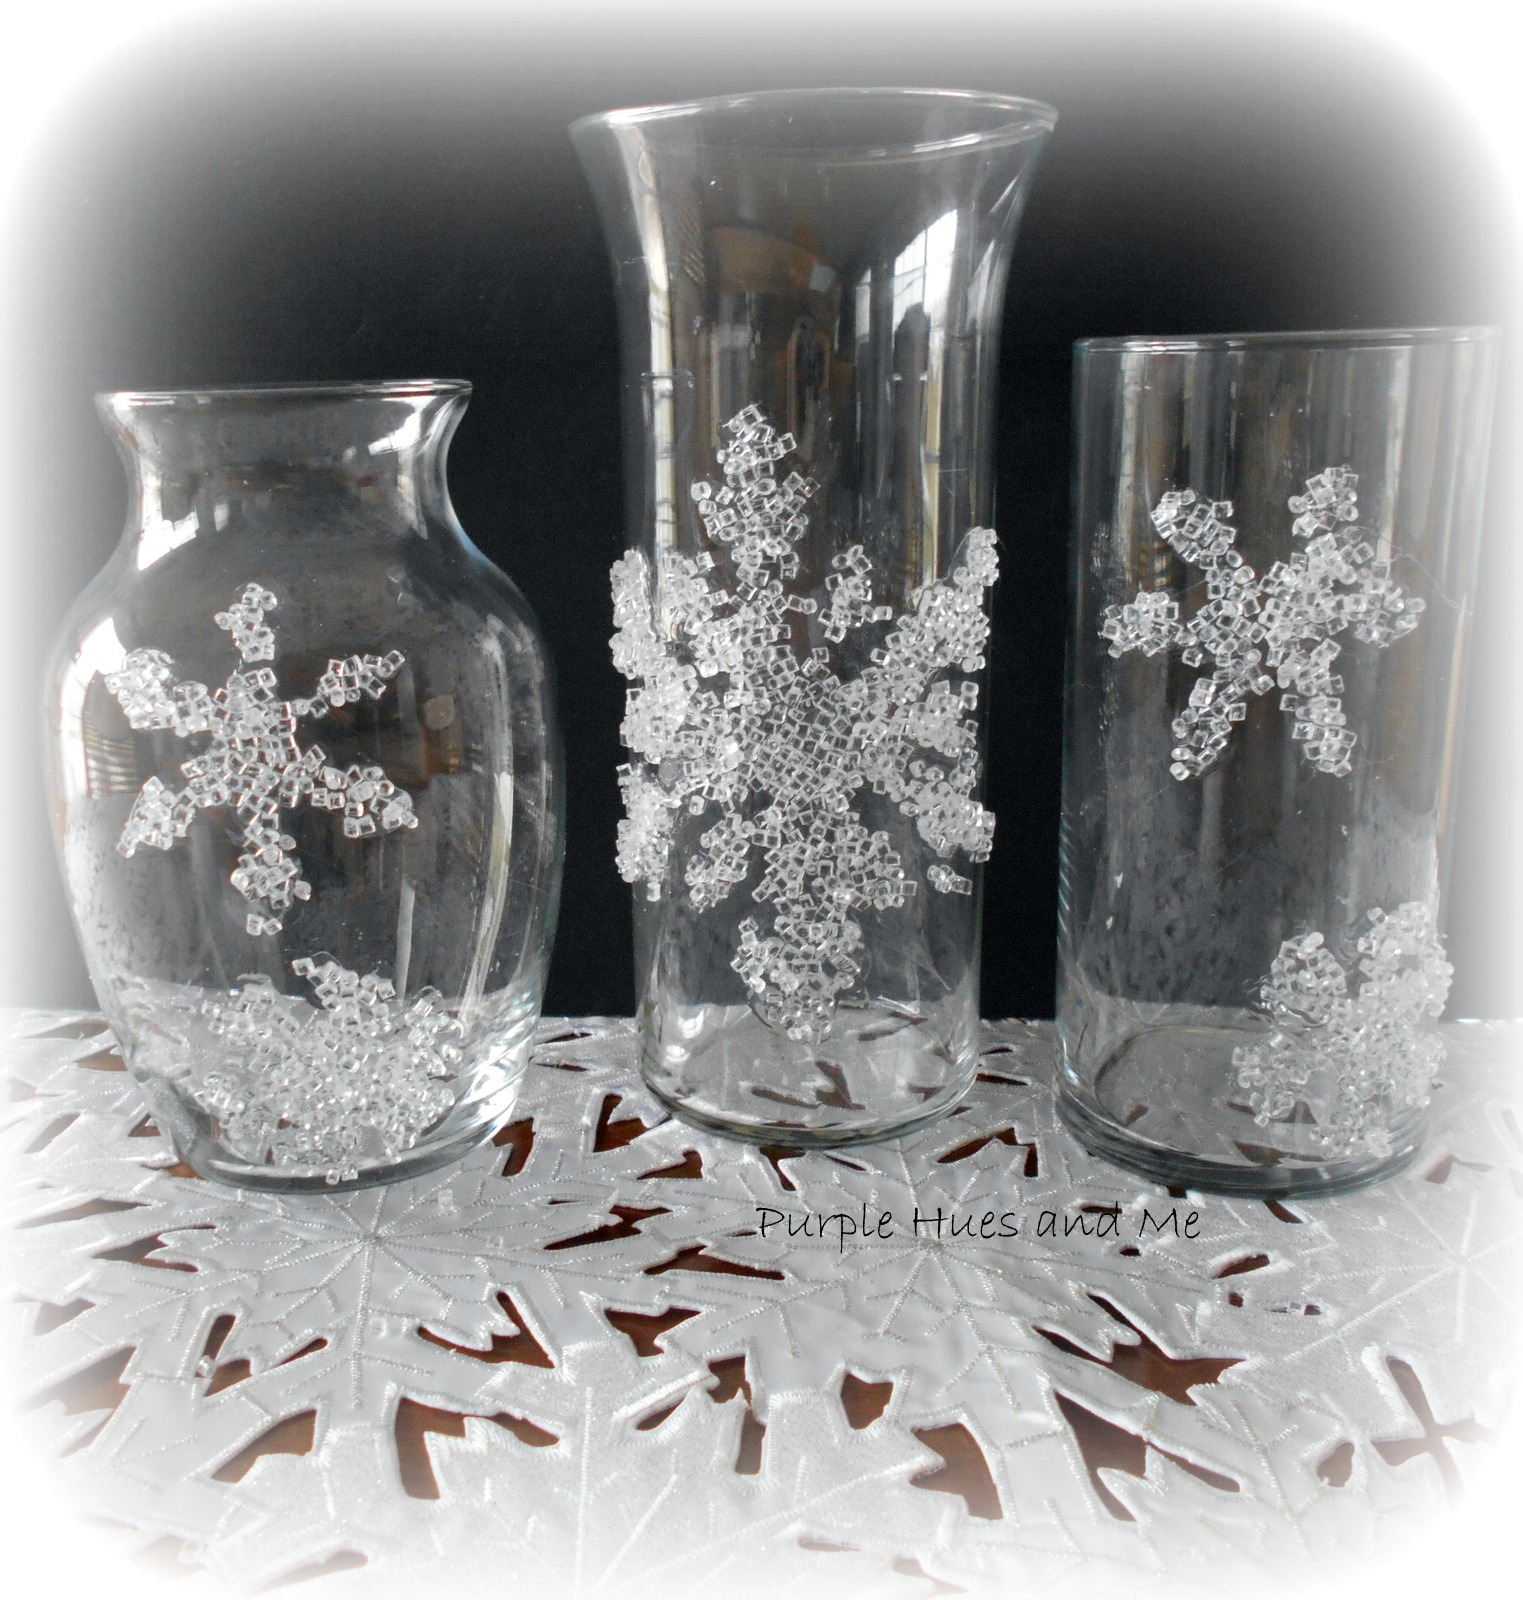 Purple Hues and Me: Decorative Filler Snowflakes Winter Theme